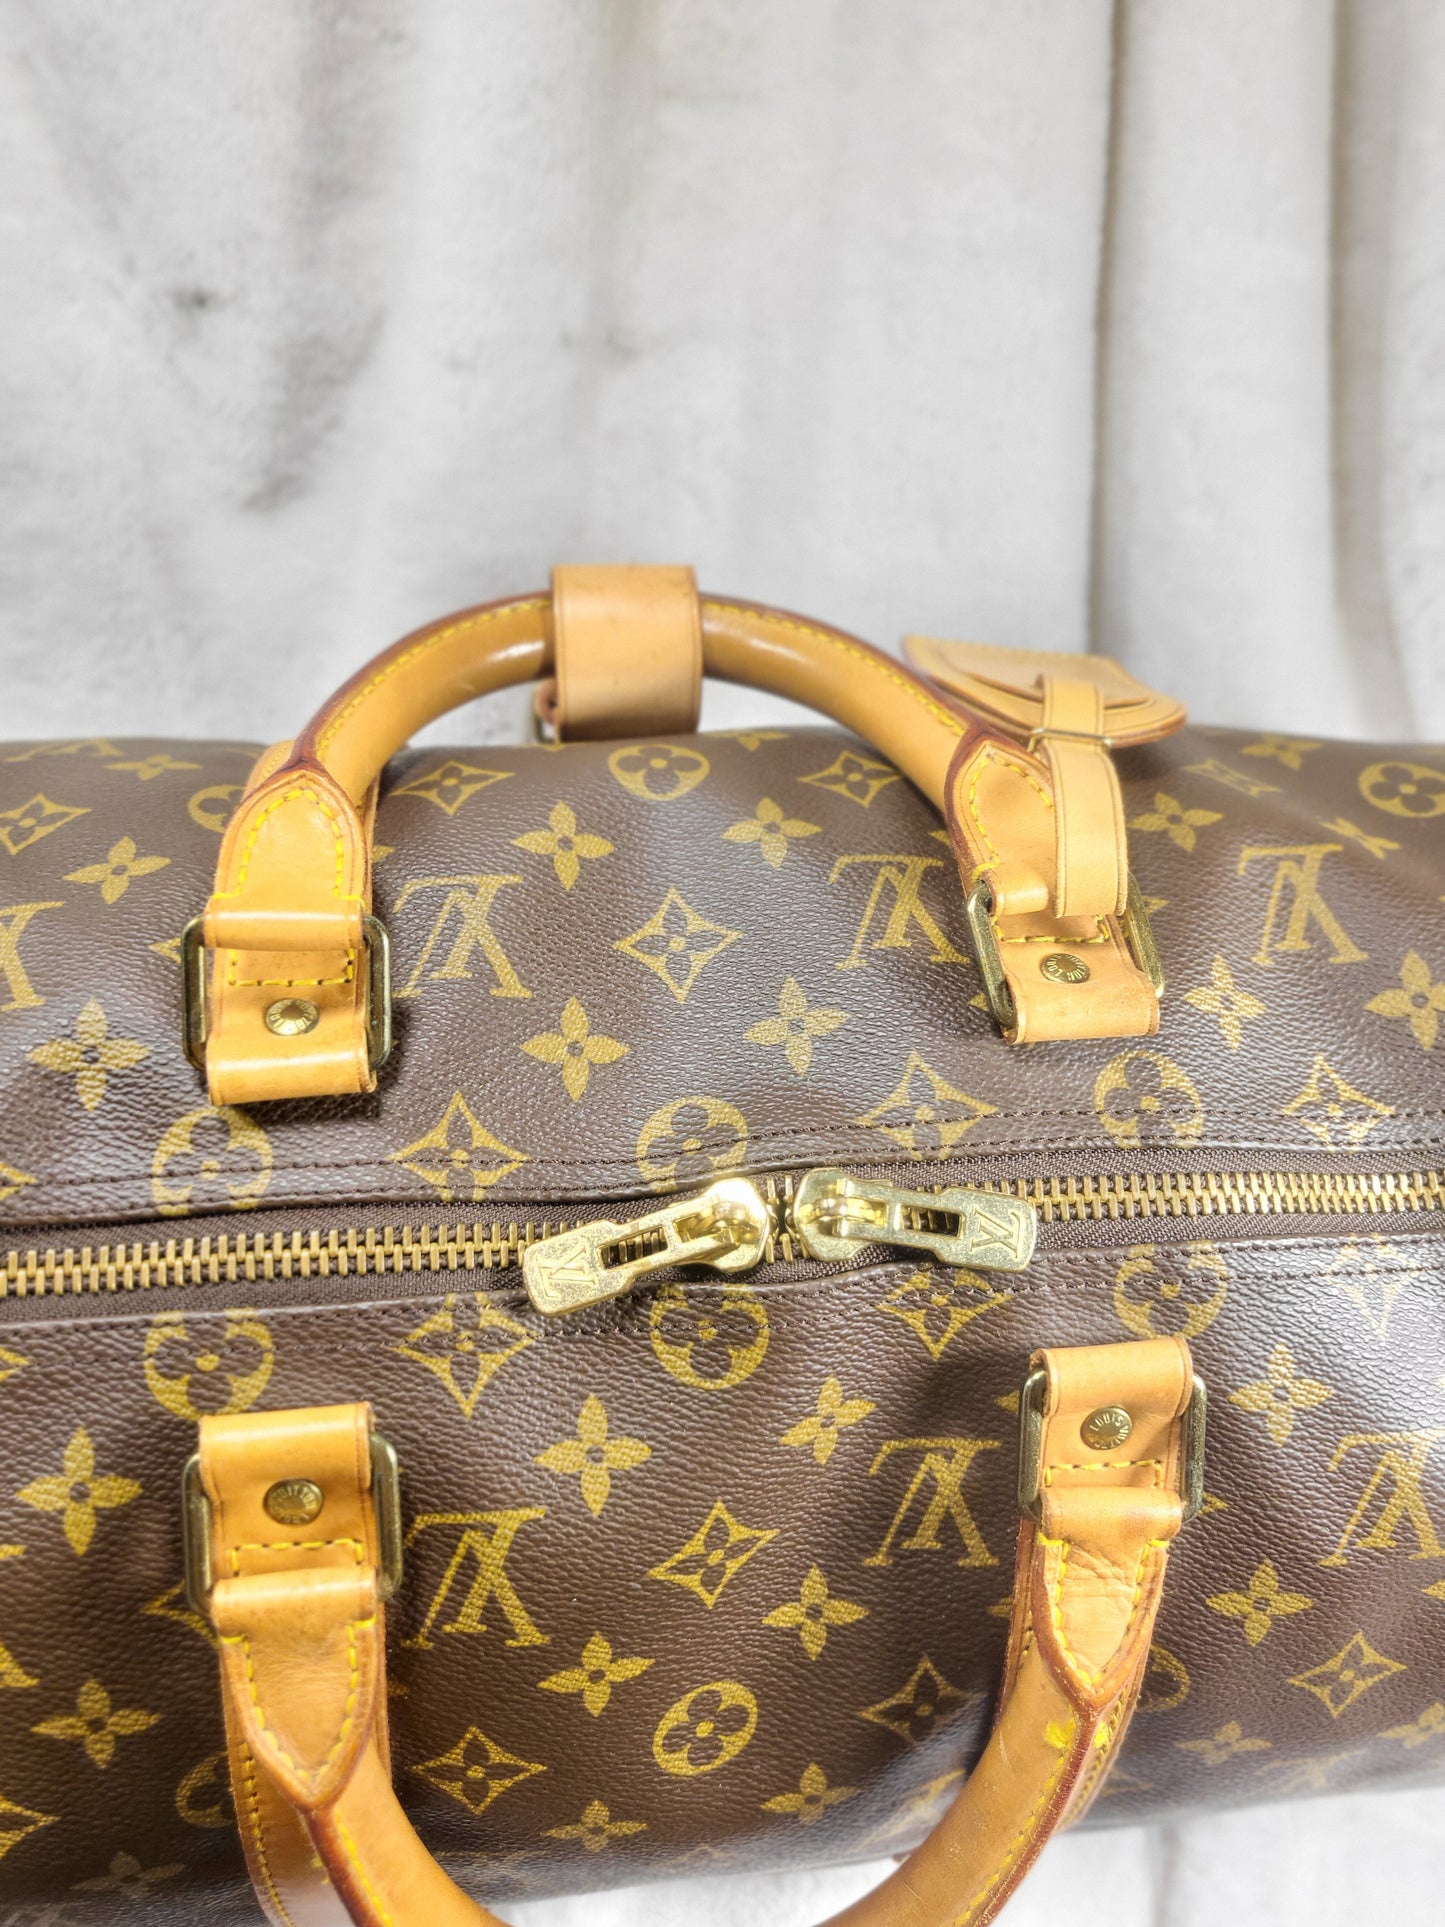 Authentic pre-owned Louis Vuitton Keepall 50 bandoliere travel luggage bag